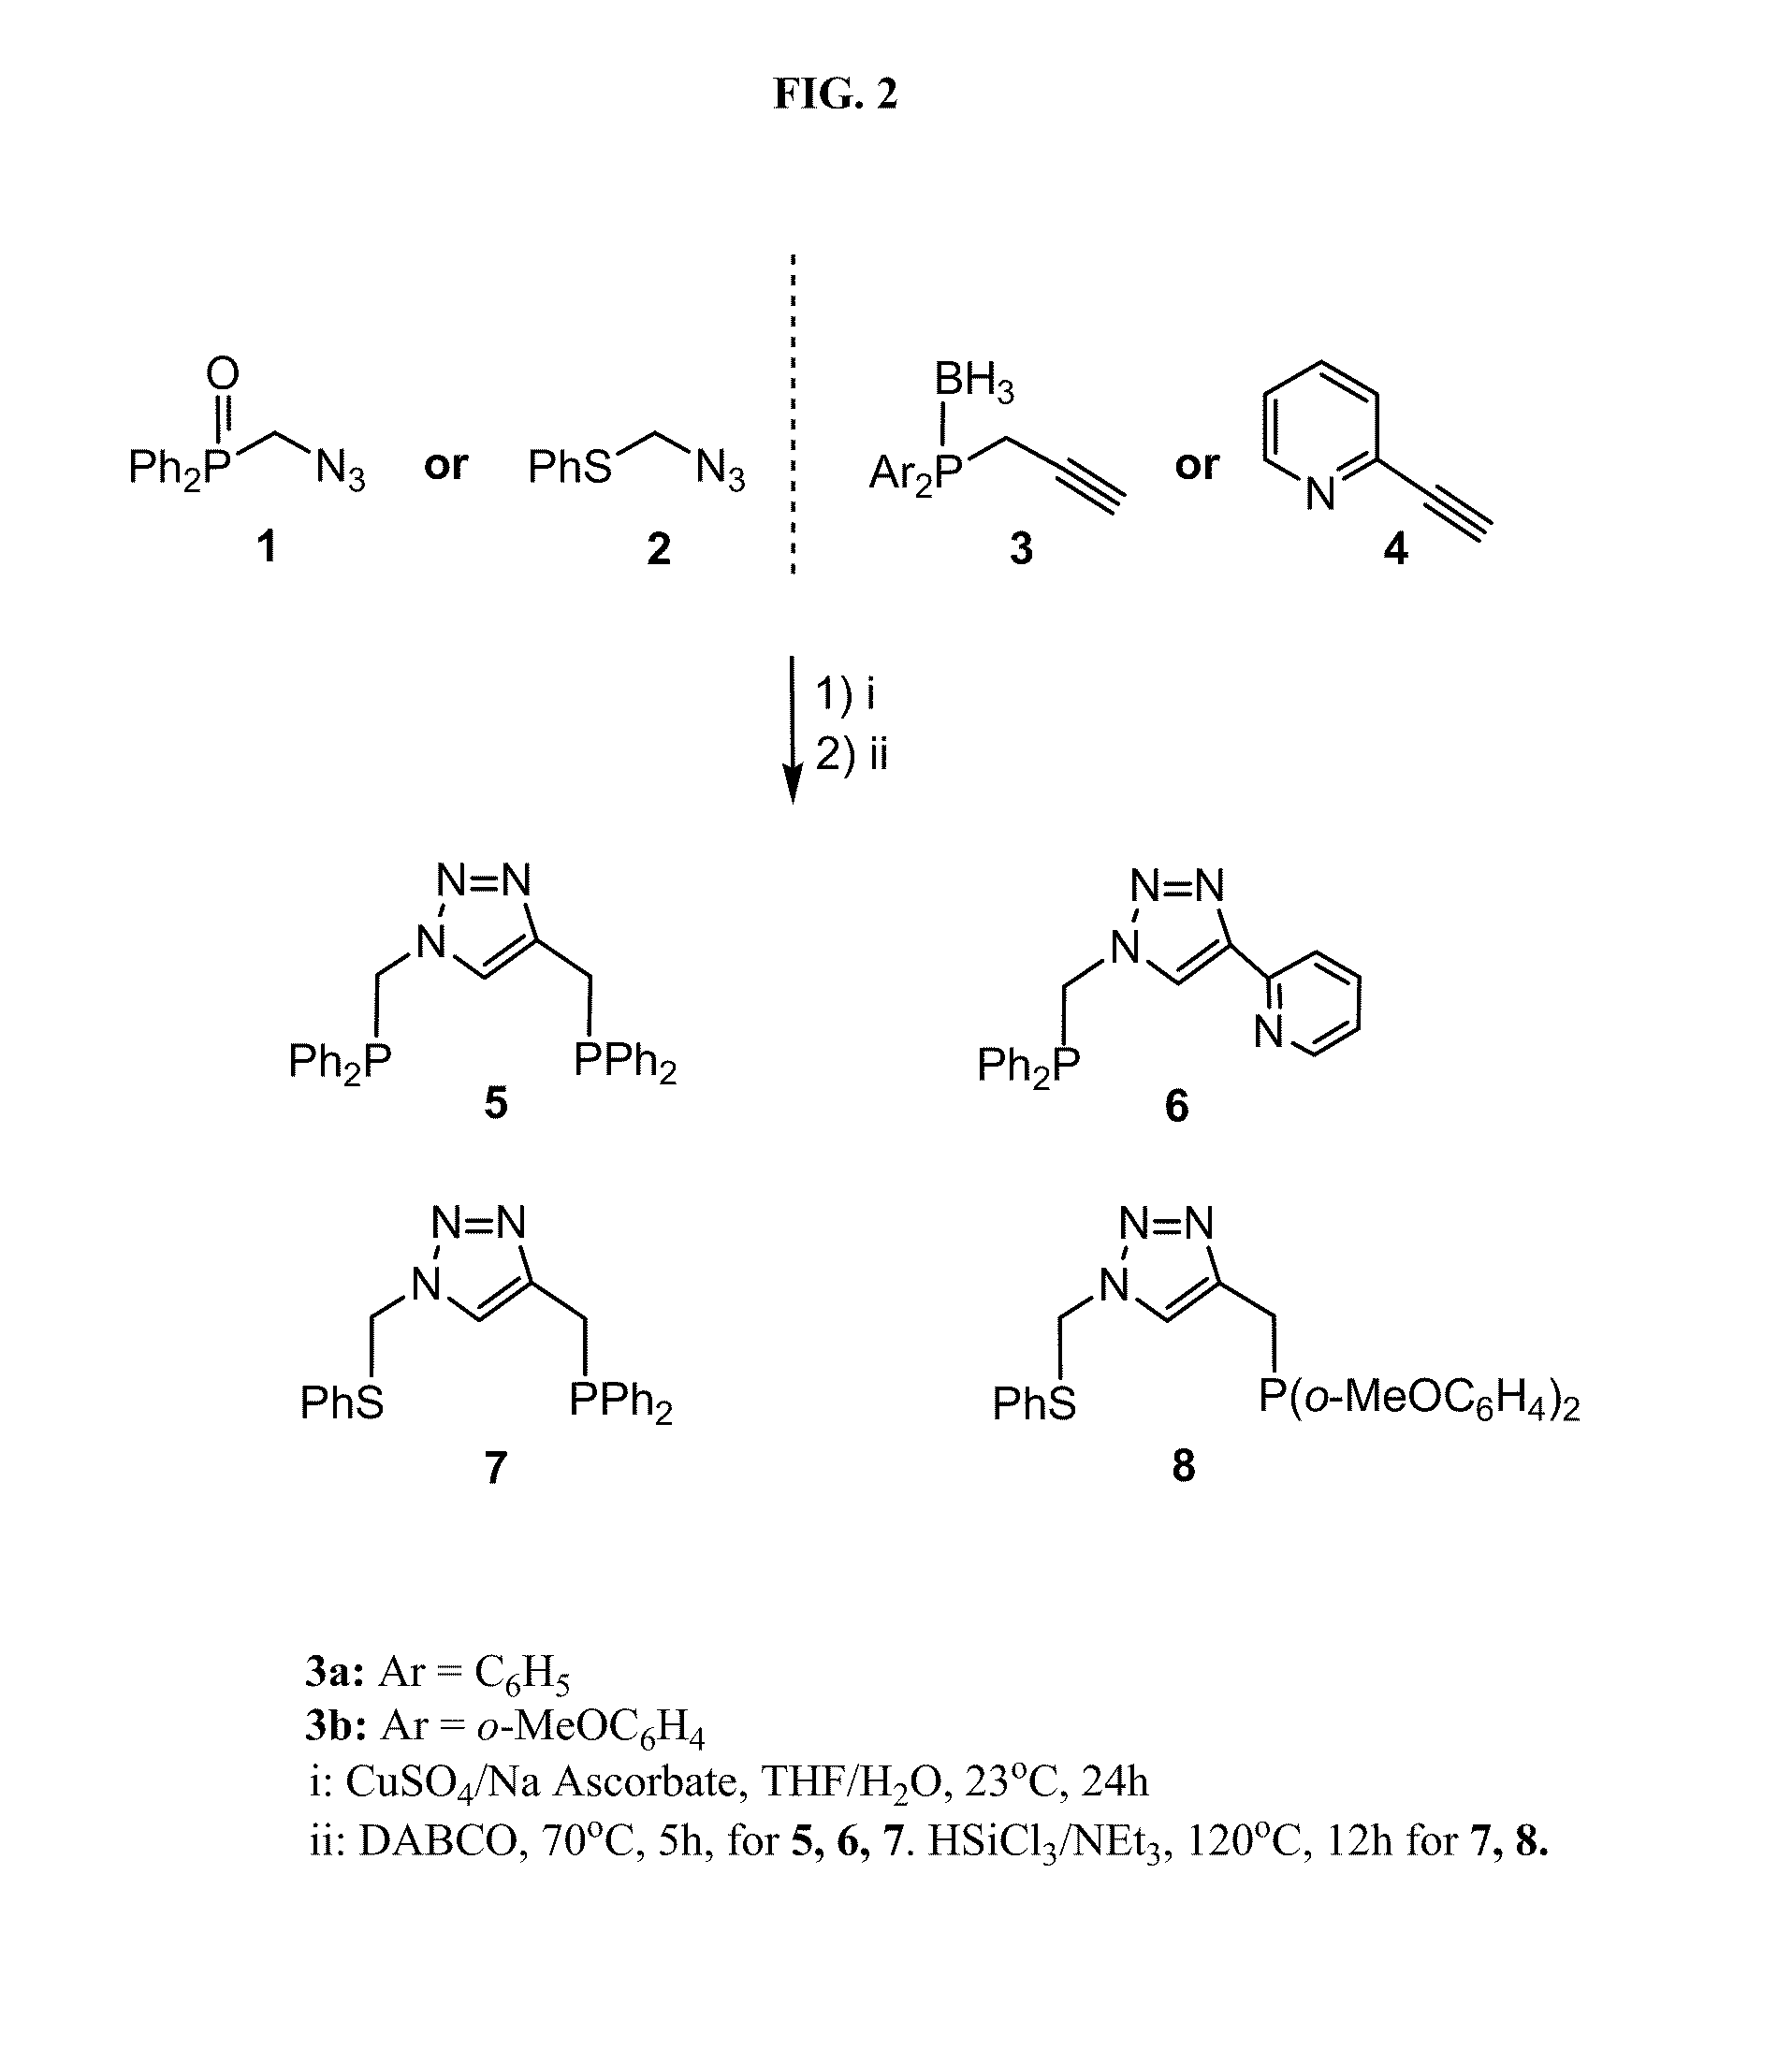 Novel diarylphosphine- and dialkylphosphine-containing compounds, processes of preparing same and uses thereof as tridentate ligands